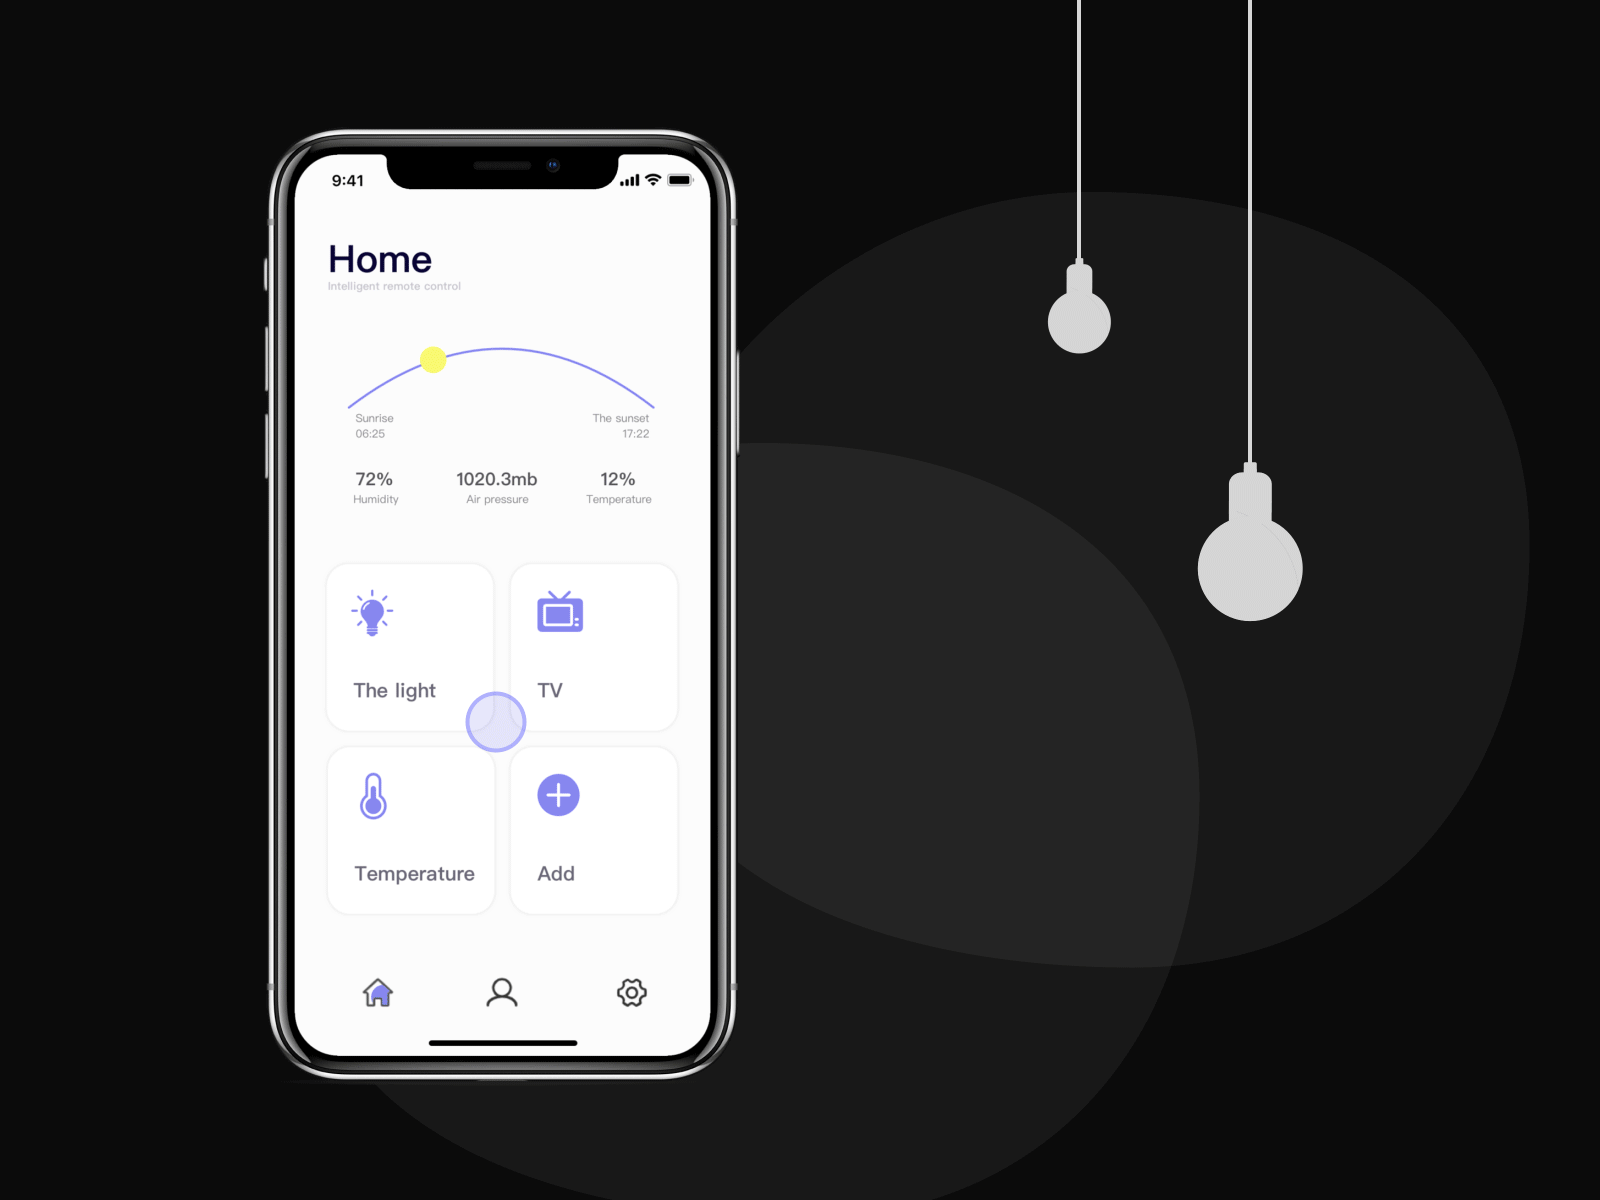 Intelligent remote control ae ai architectural icons brightness dynamic effect icon intelligent remote control intelligent remote control interaction iphone logo page simulation experience simulation experience the smart home ui uiux